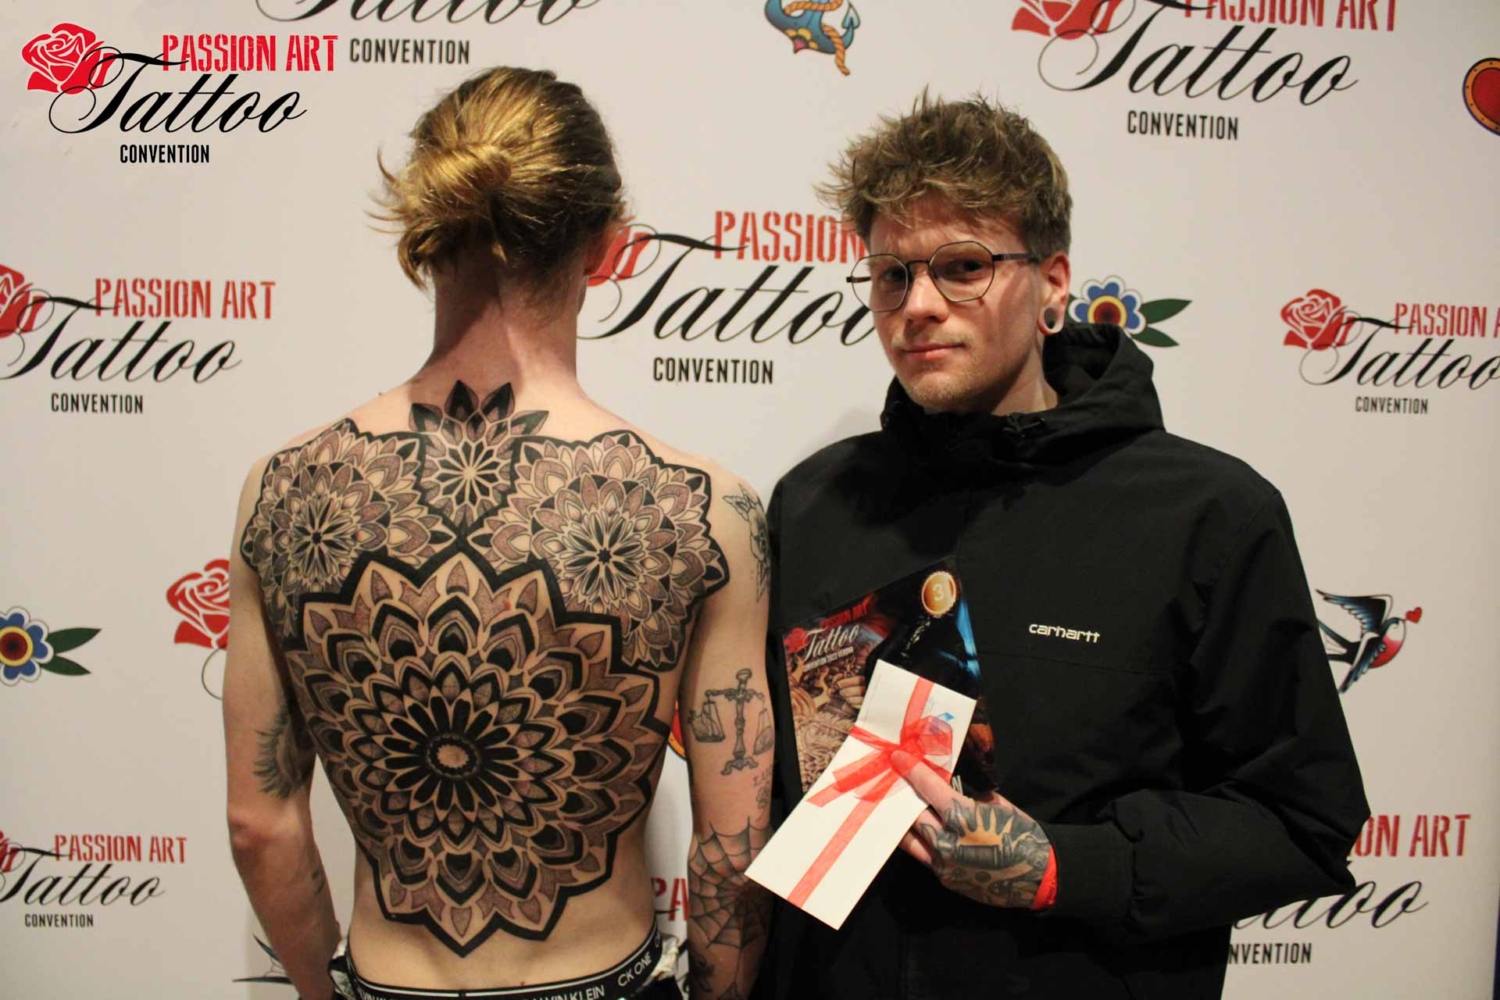 What are some gangster neck tattoo designs? - Quora